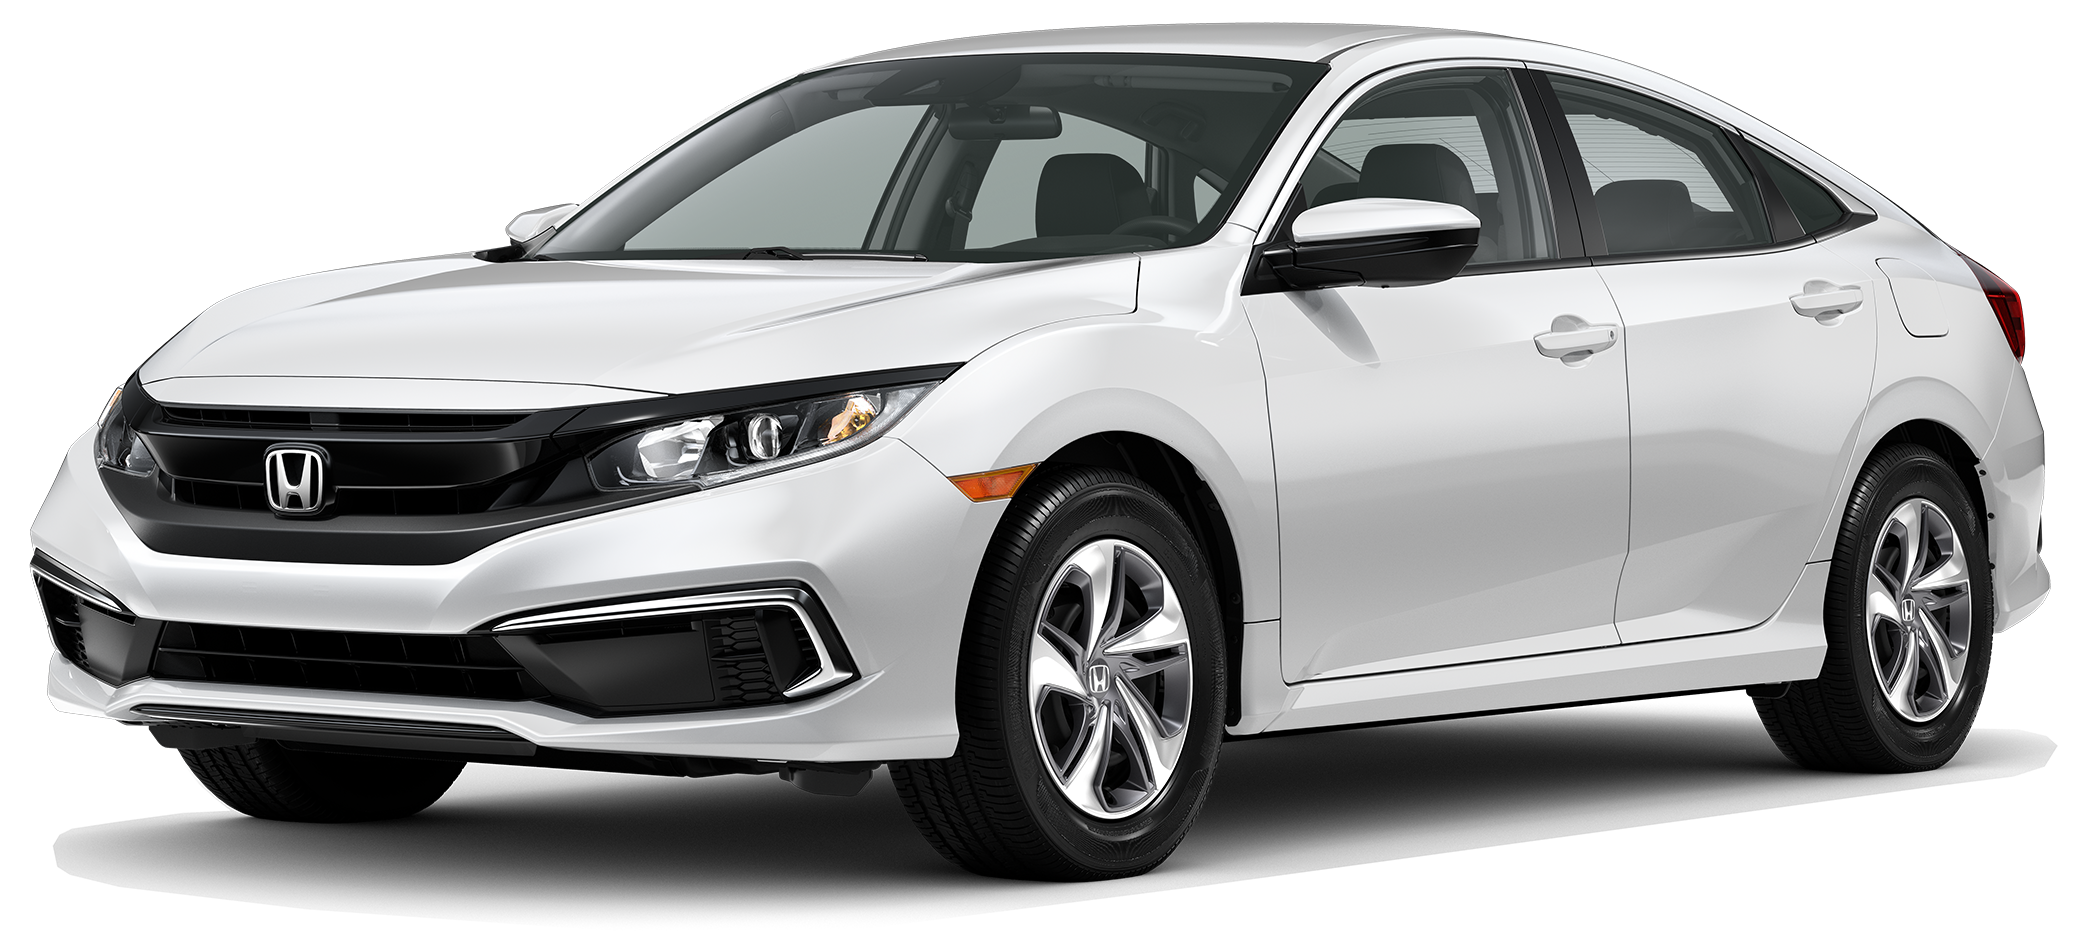 2020 Honda Civic Incentives, Specials & Offers in Las Vegas NV